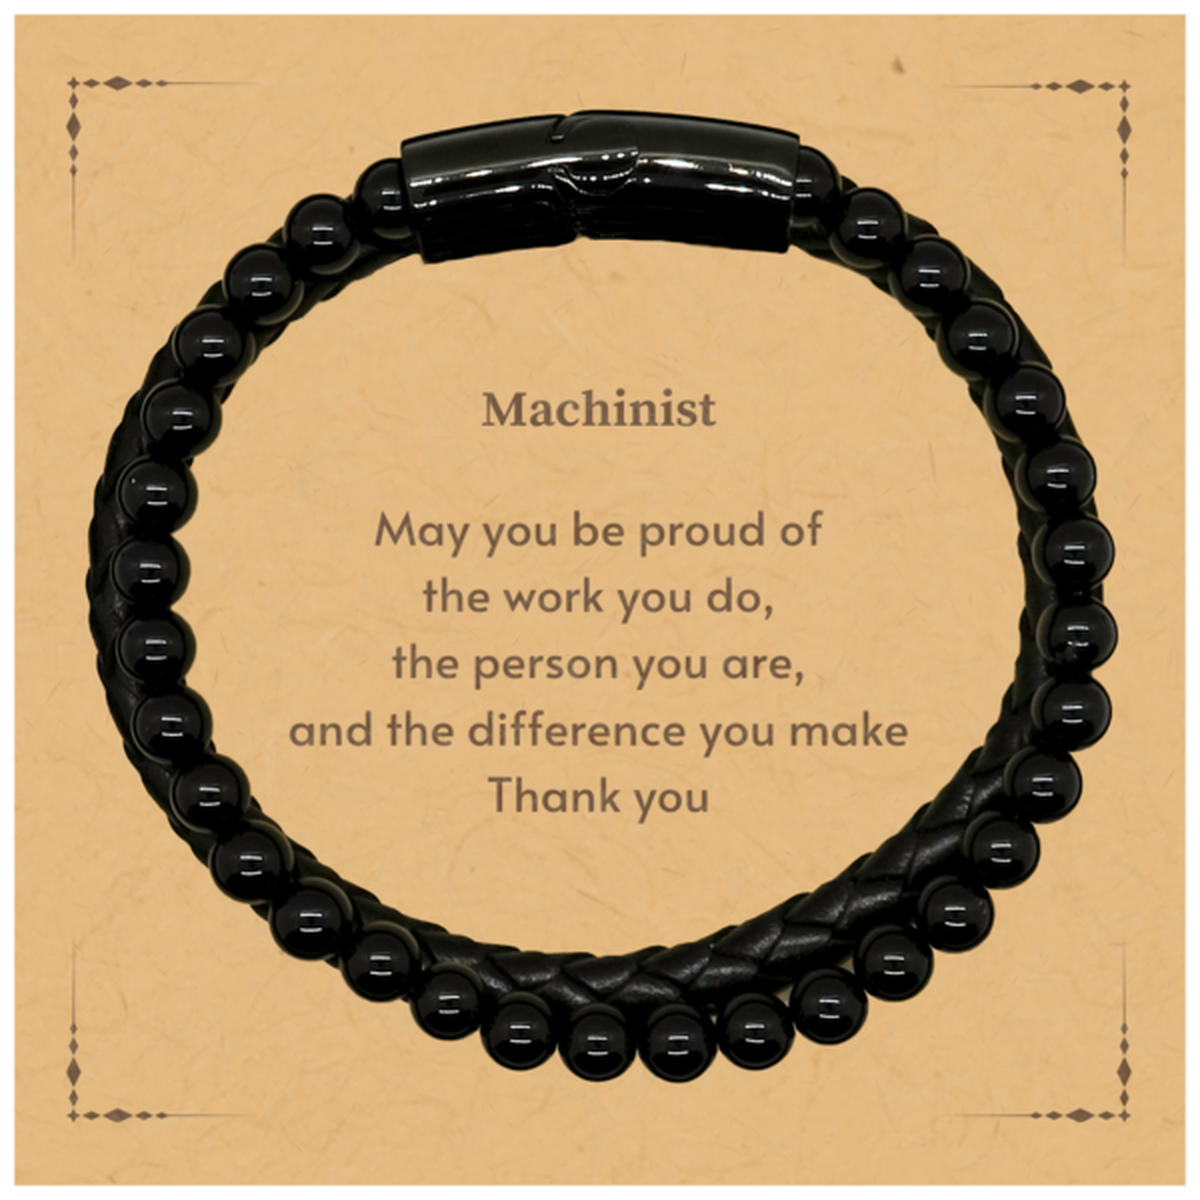 Heartwarming Stone Leather Bracelets Retirement Coworkers Gifts for Machinist, Machinist May You be proud of the work you do, the person you are Gifts for Boss Men Women Friends